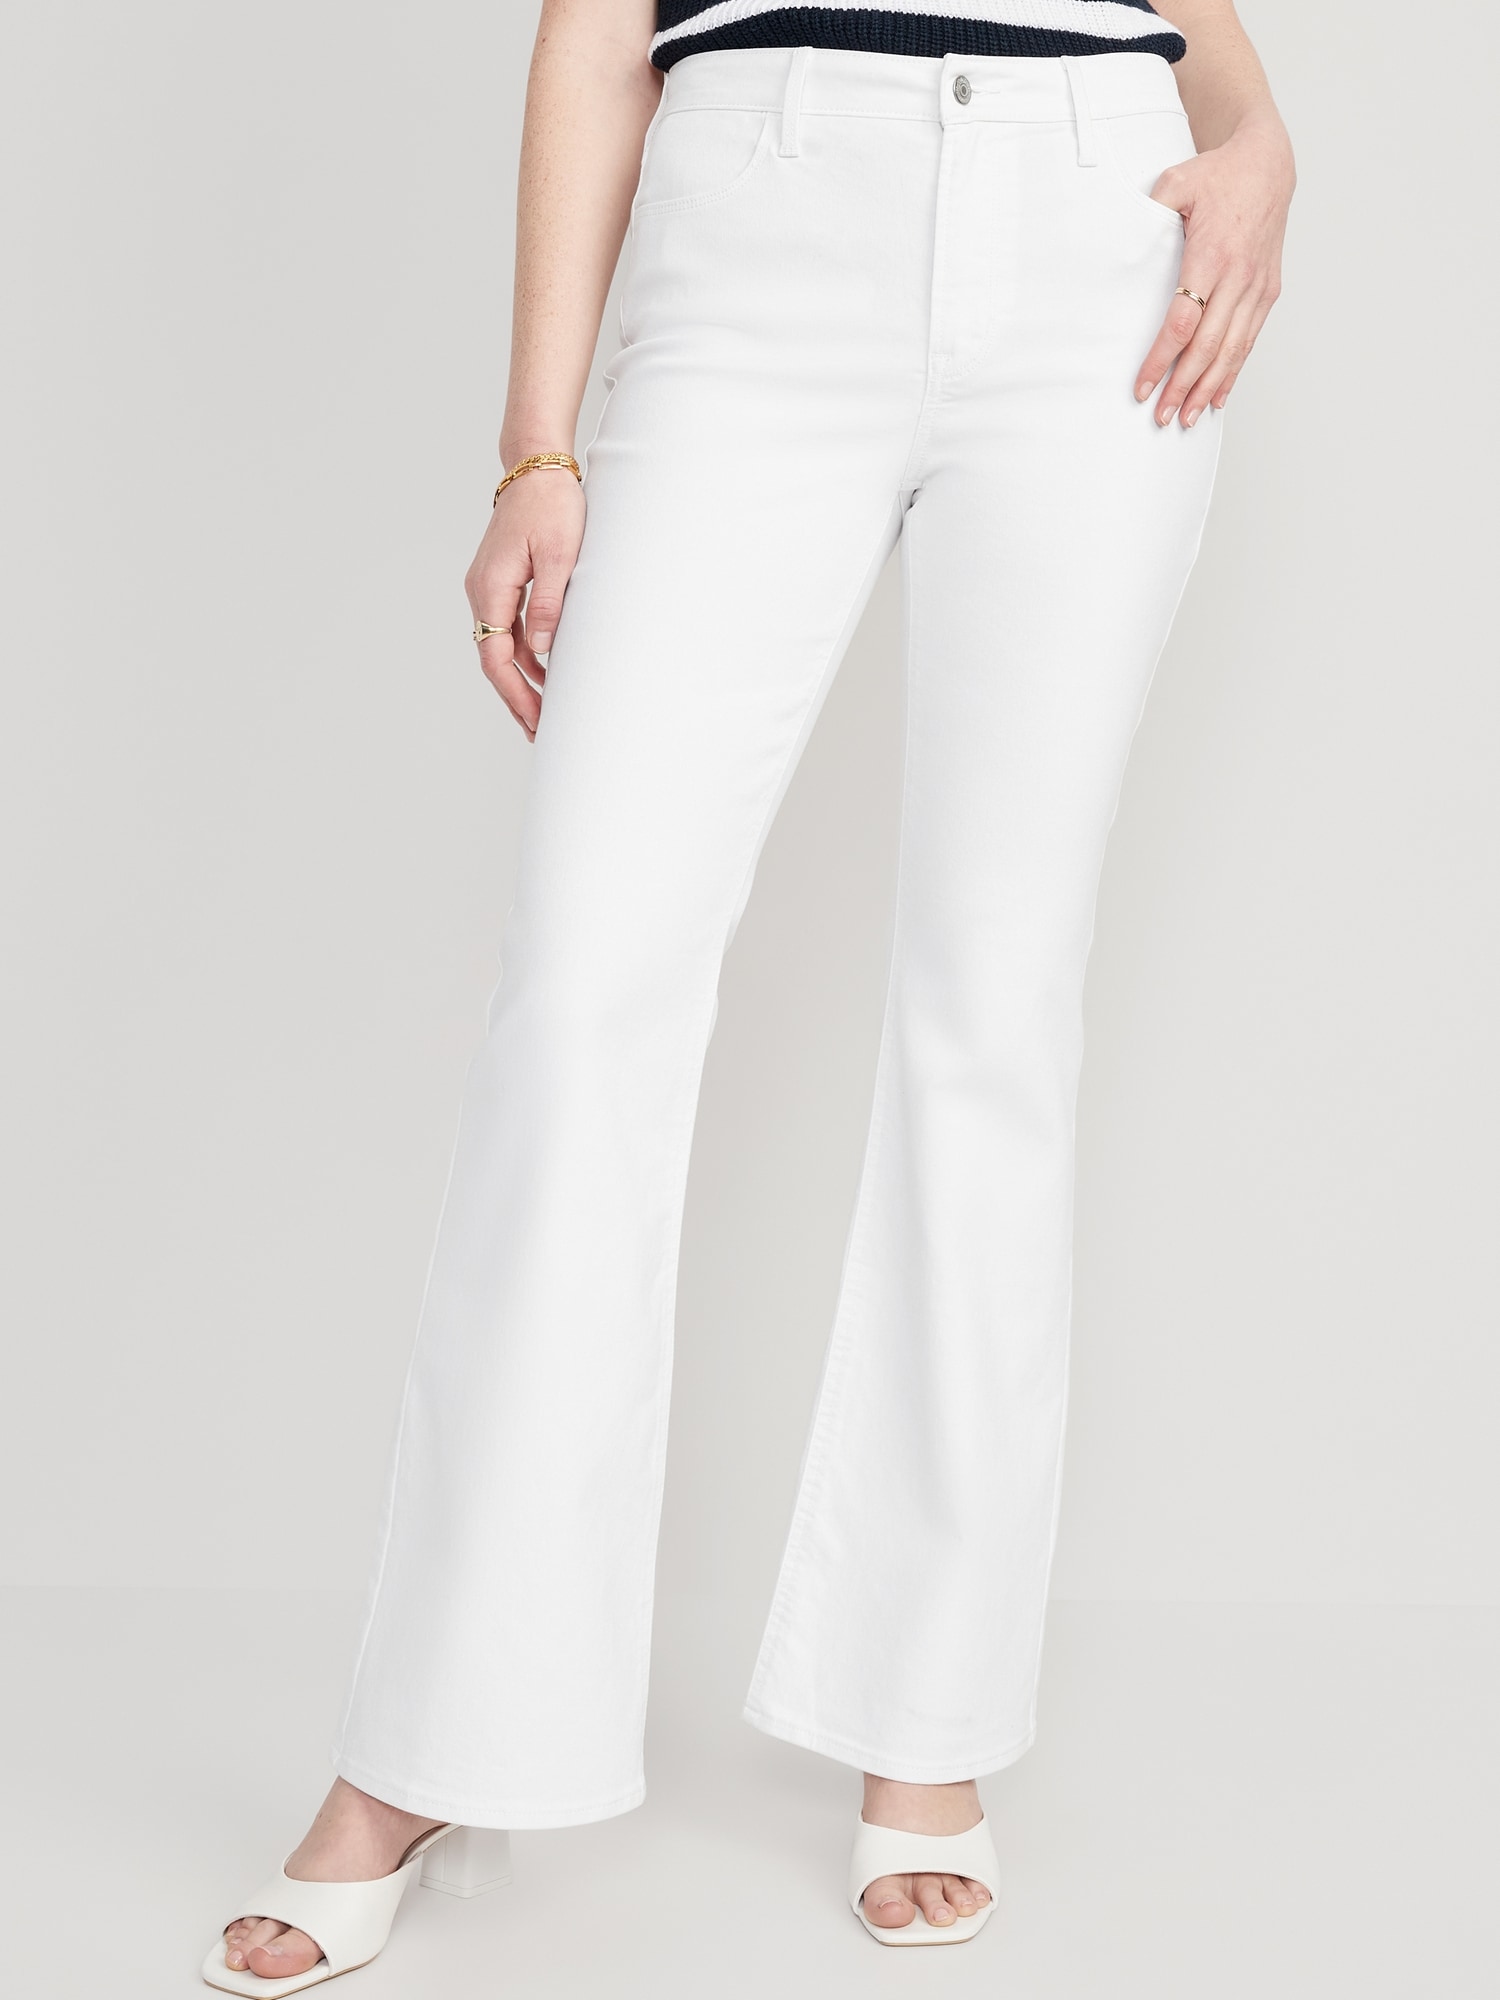 High-Waisted Wow White Jeans for Women | Old Navy